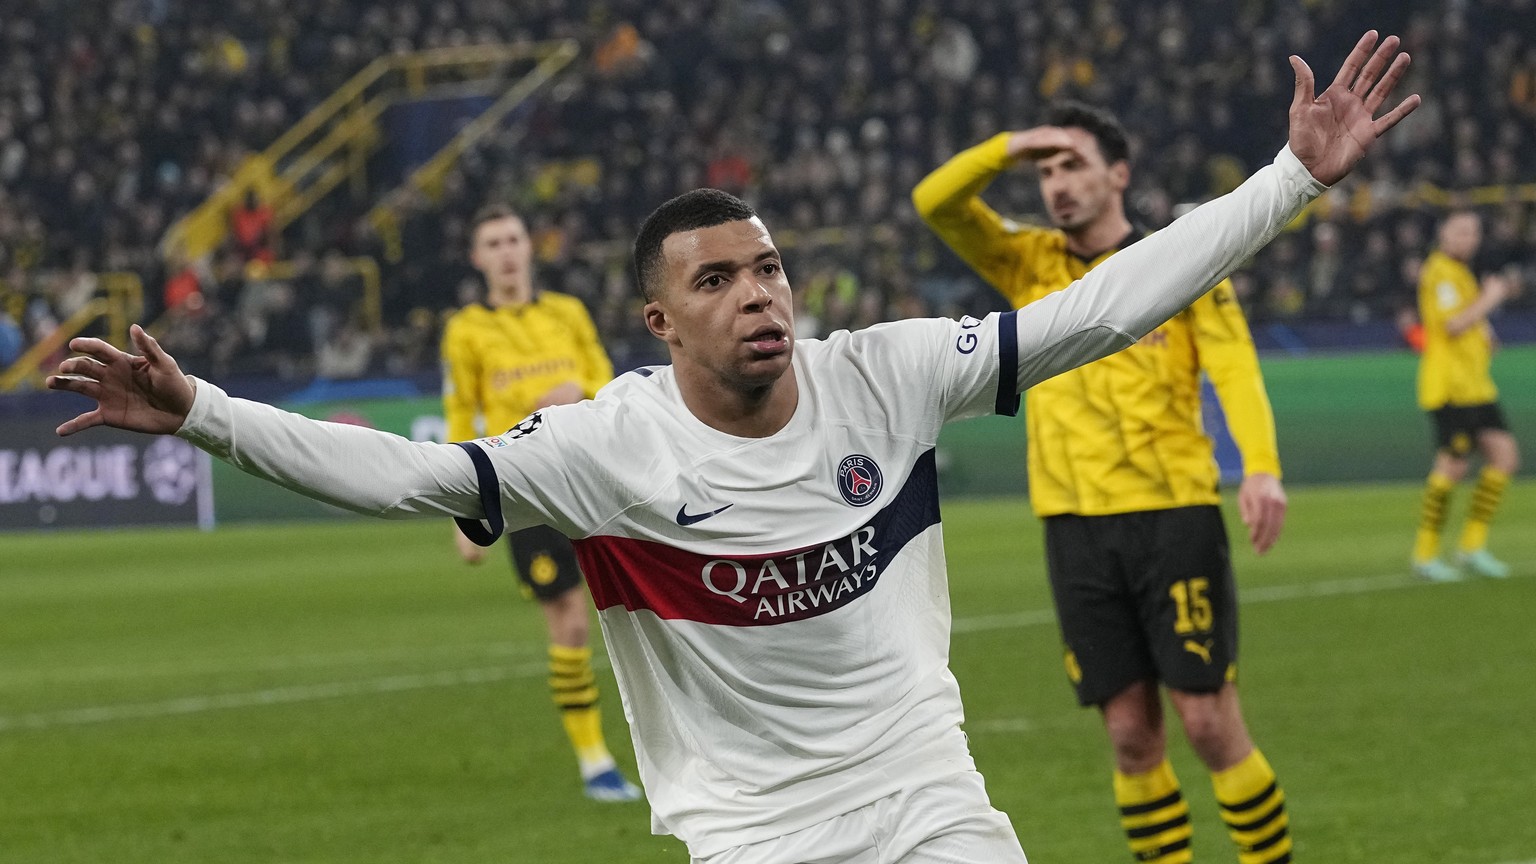 PSG&#039;s Kylian Mbappe celebrates after scoring a goal that was later disallowed during the Champions League Group F soccer match between Borussia Dortmund and Paris Saint-Germain at the Signal Idun ...